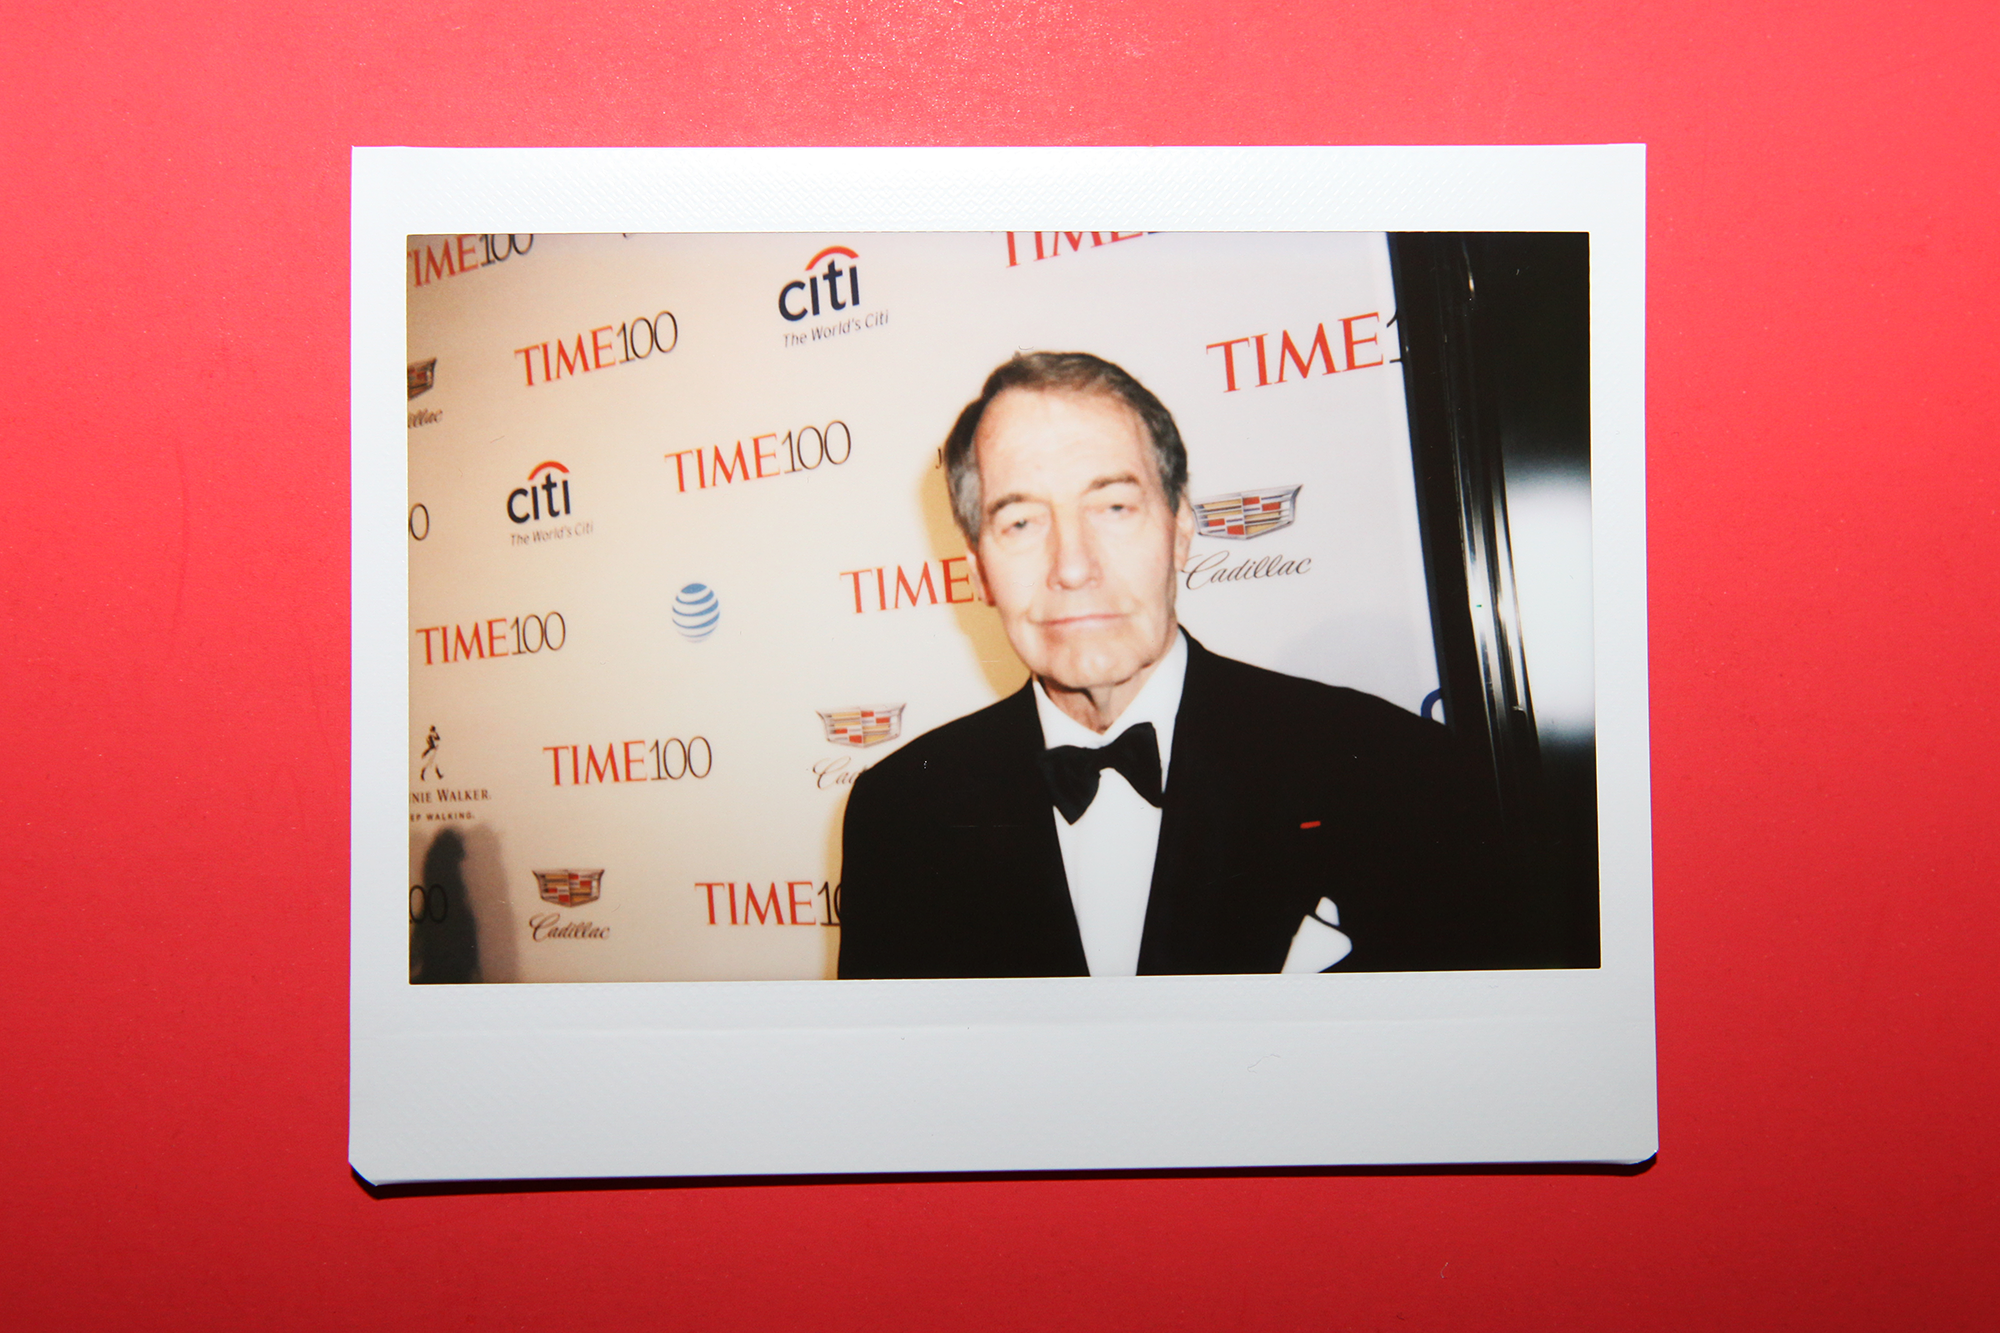 Charlie Rose arrives at the TIME 100 Gala at the Time Warner Center on April 26, 2016 in New York City.